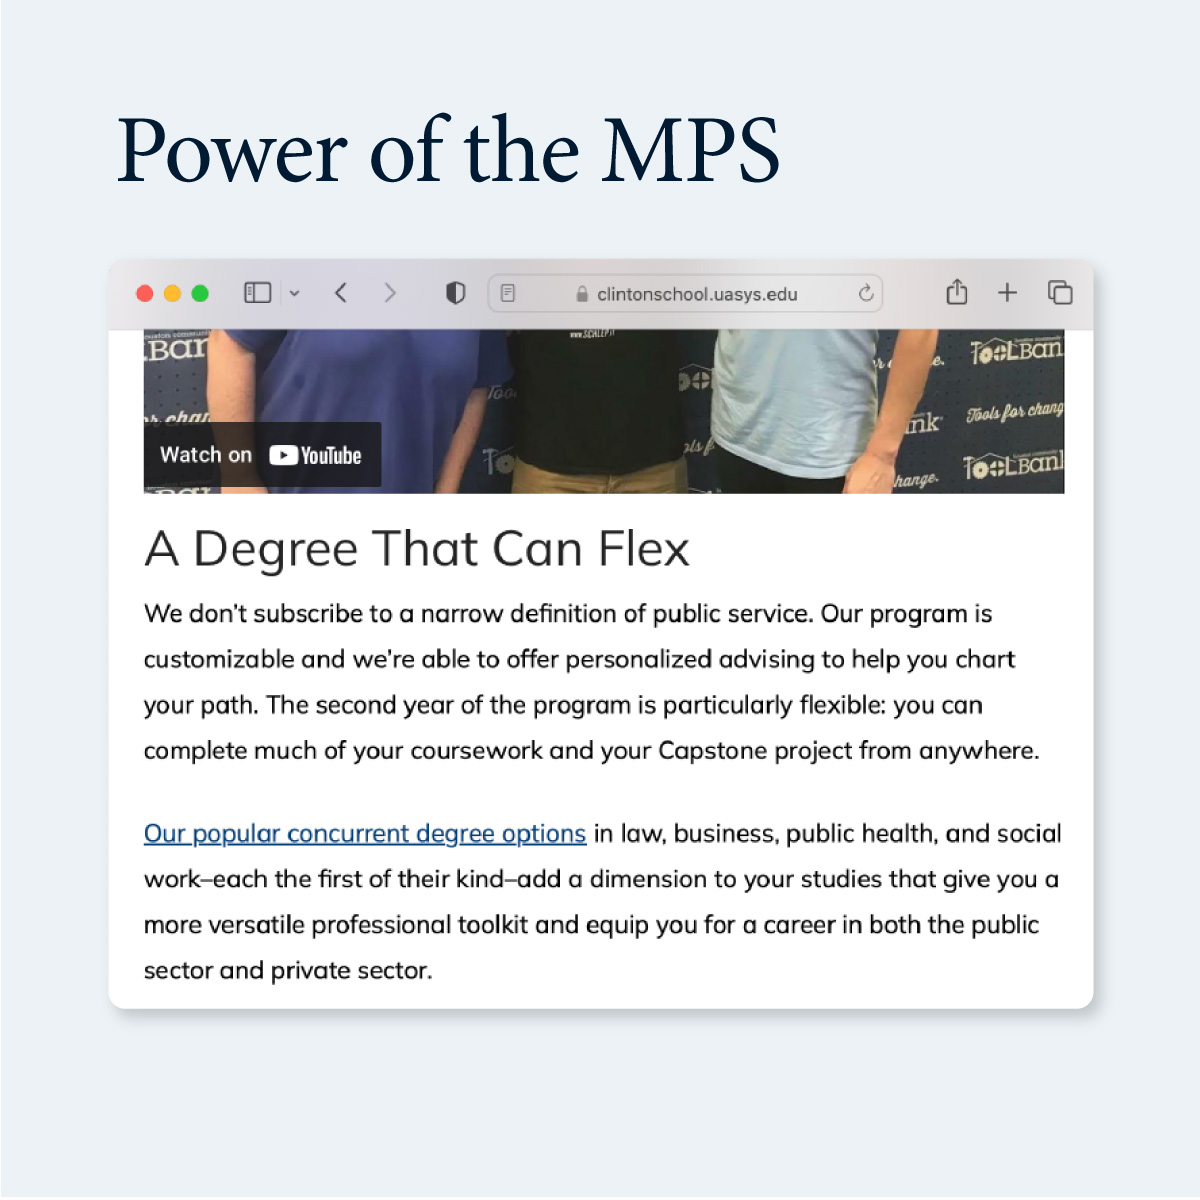 Power of the MPS web page